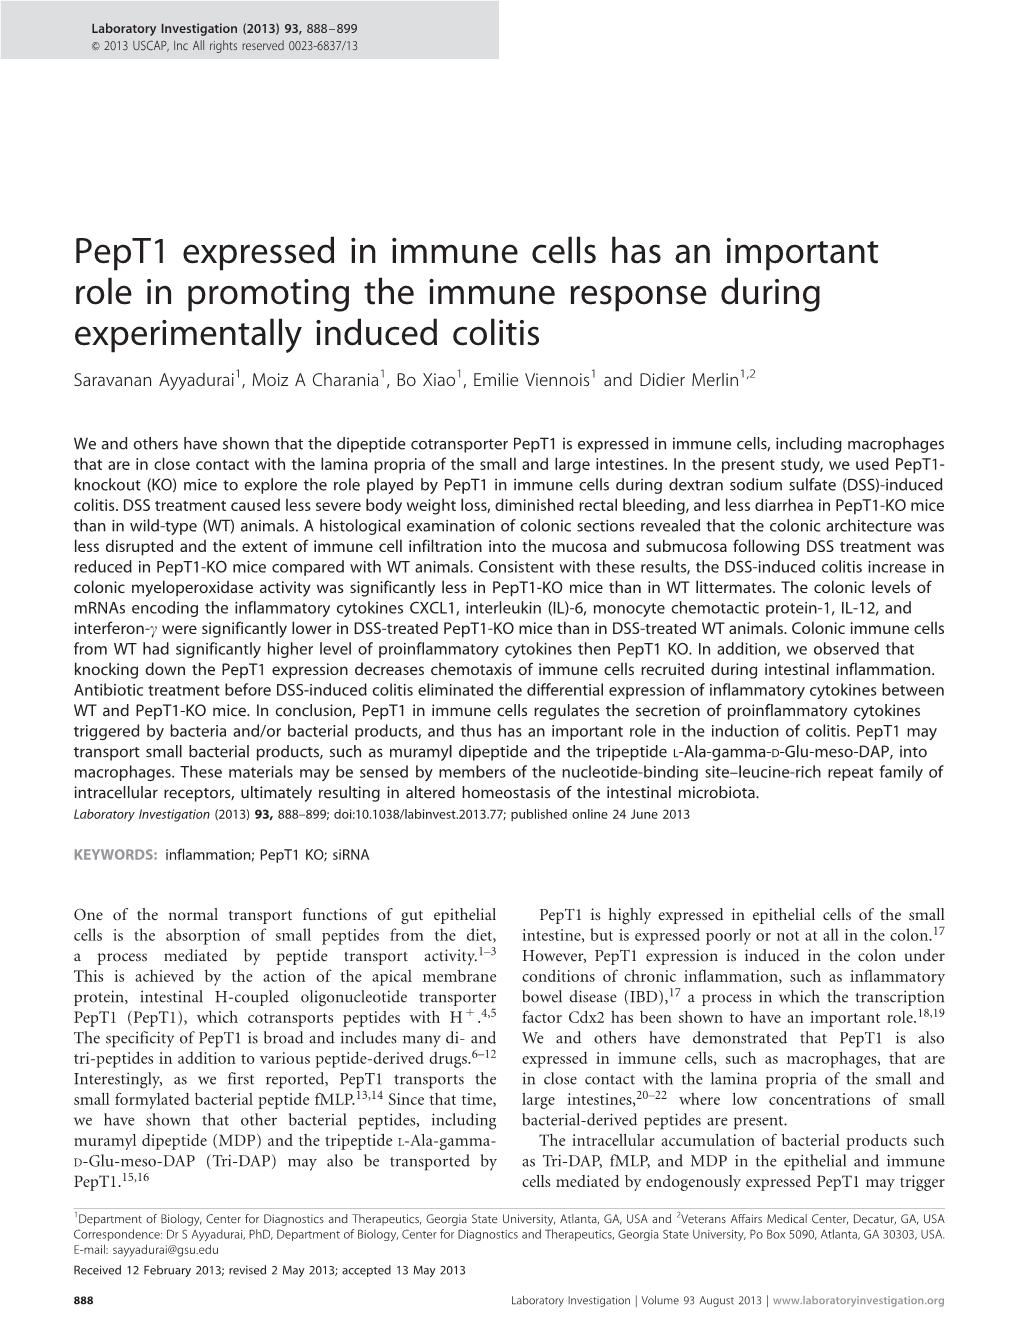 Pept1 Expressed in Immune Cells Has an Important Role in Promoting The